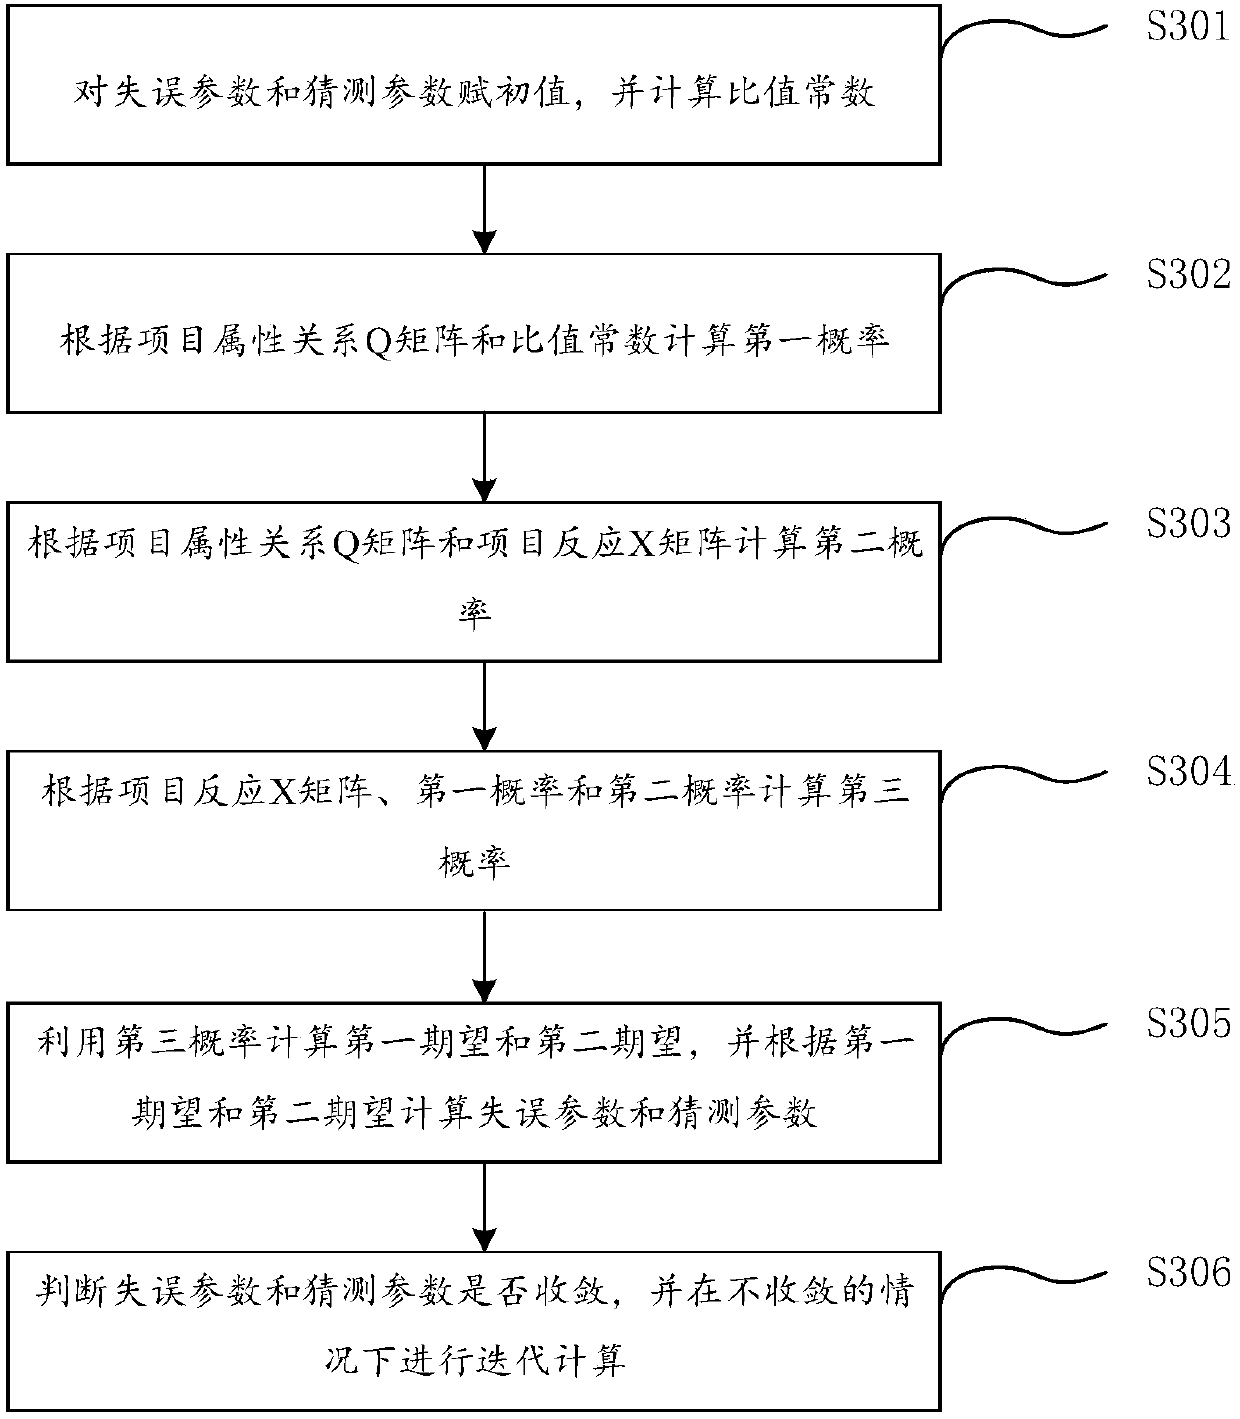 Cognitive diagnosis method and system